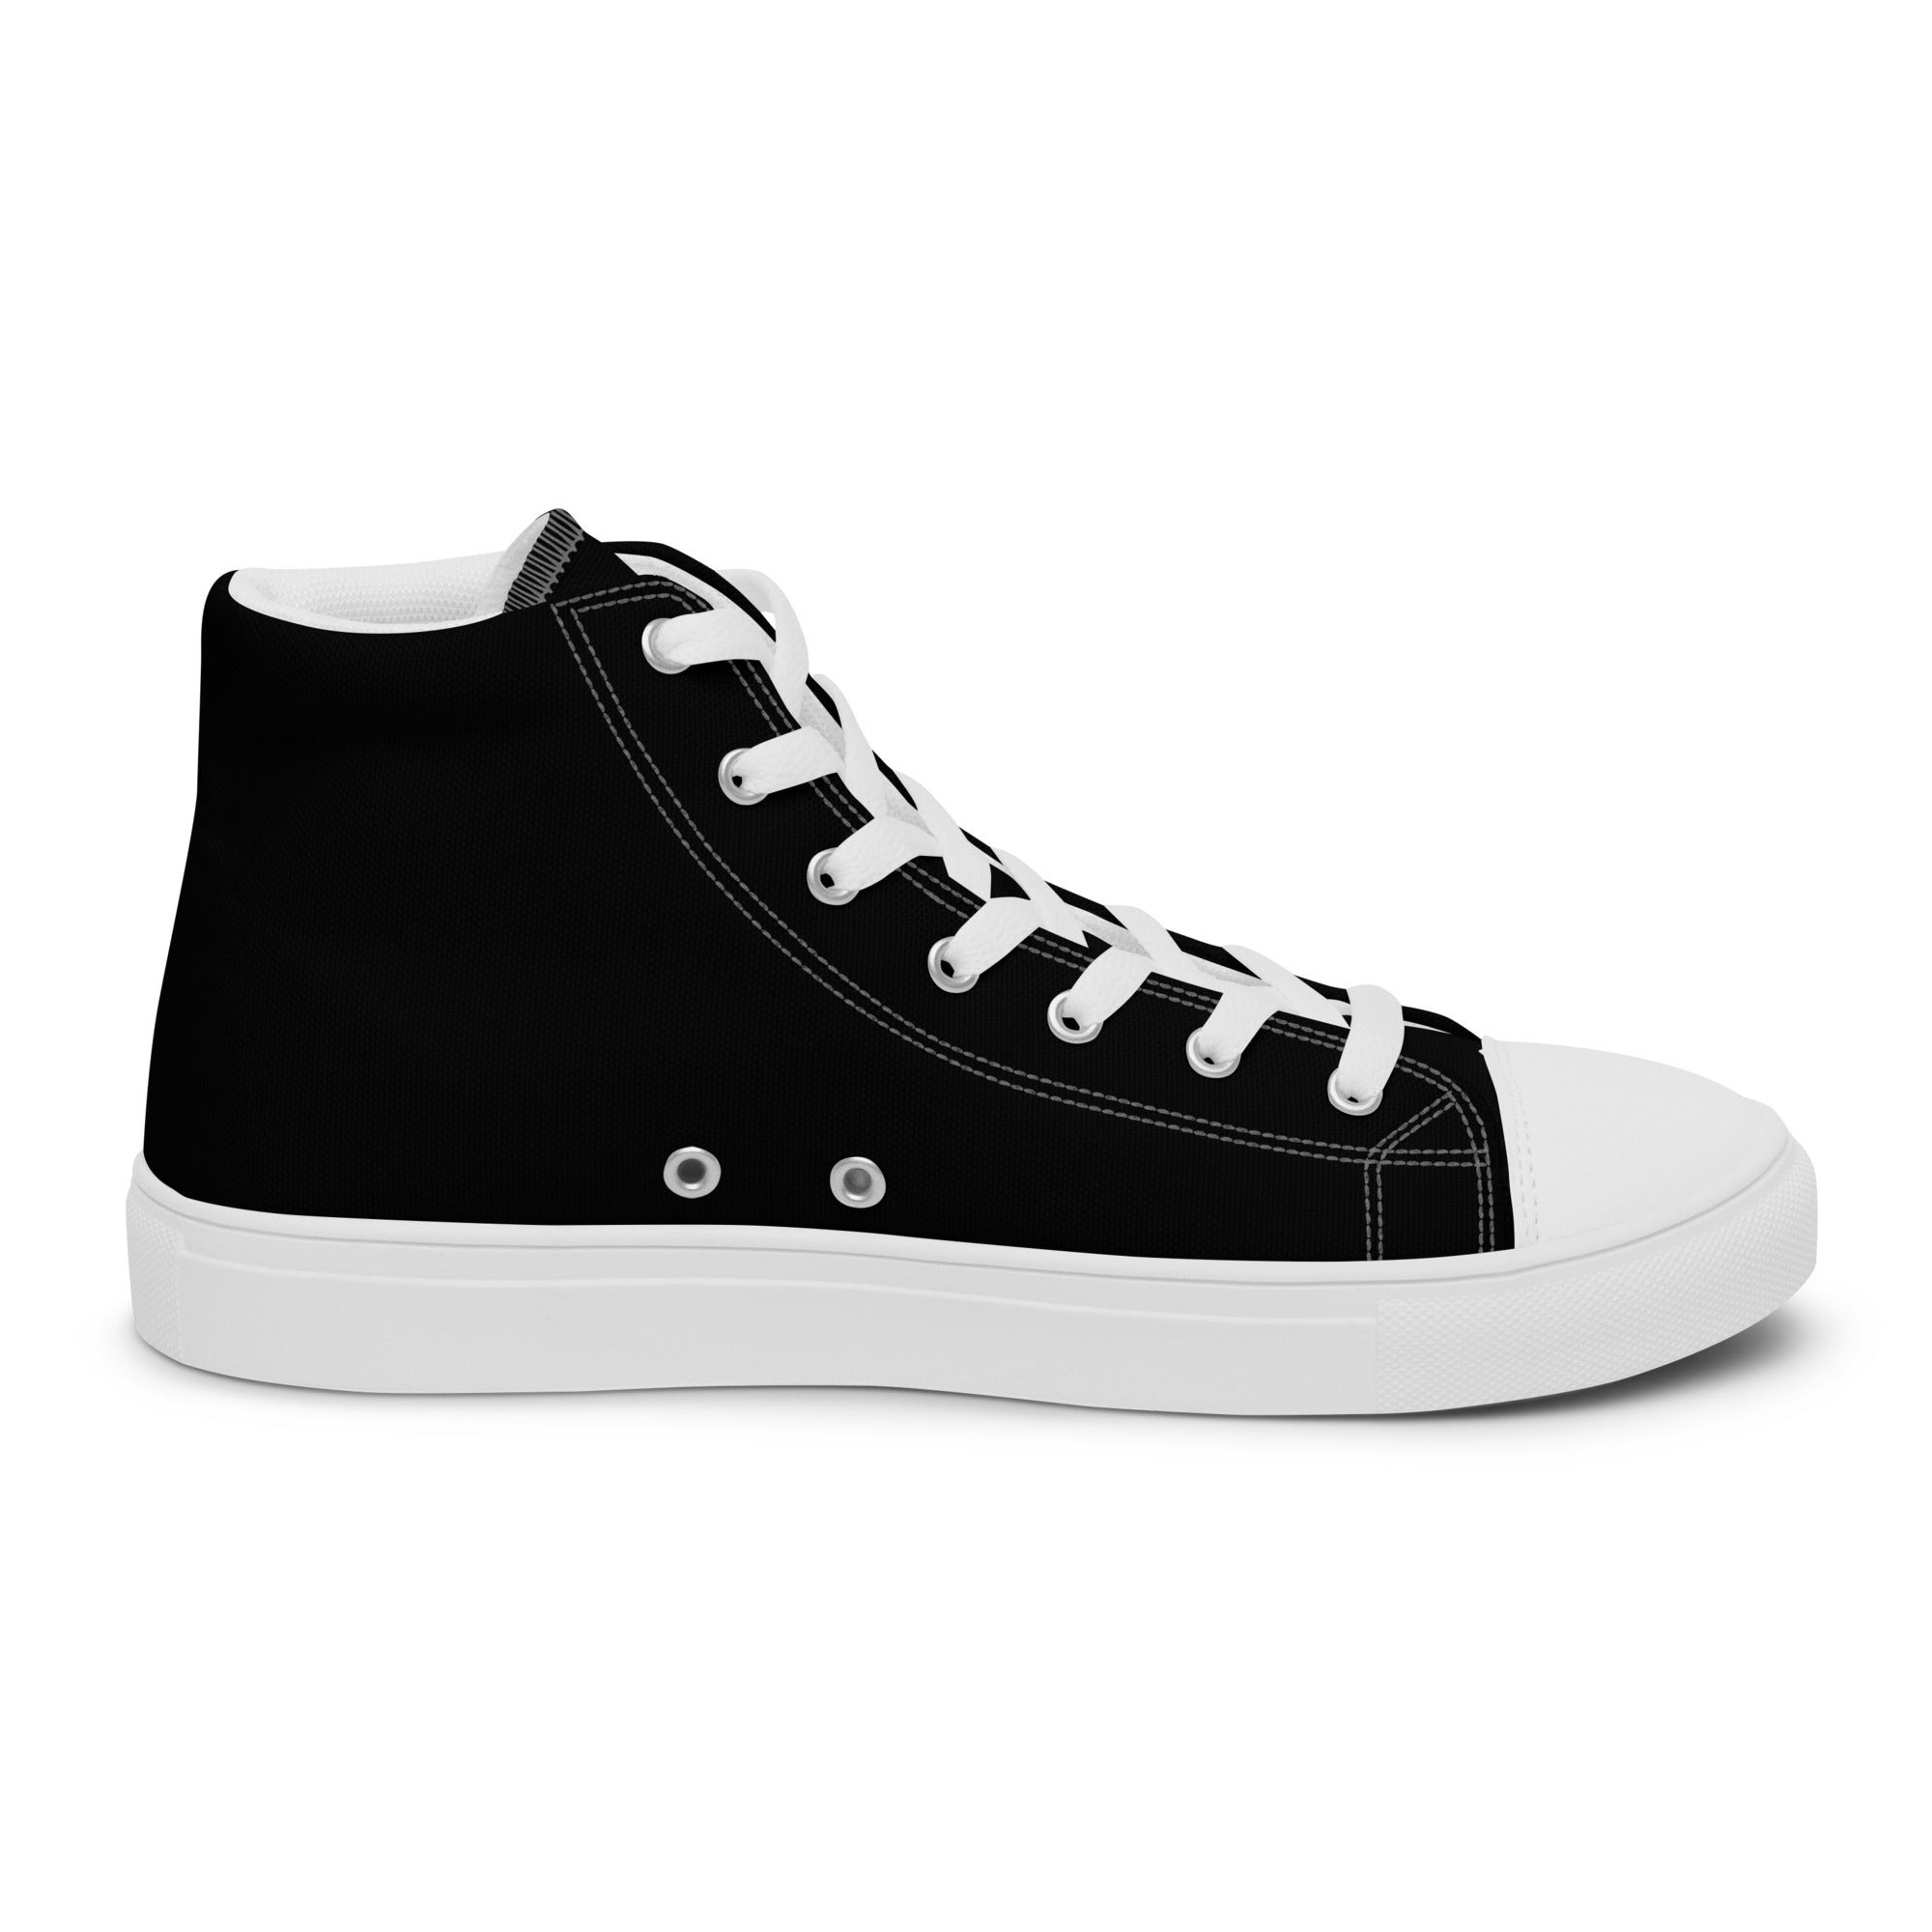 "SAY MY NAME" women's high black canvas sneakers